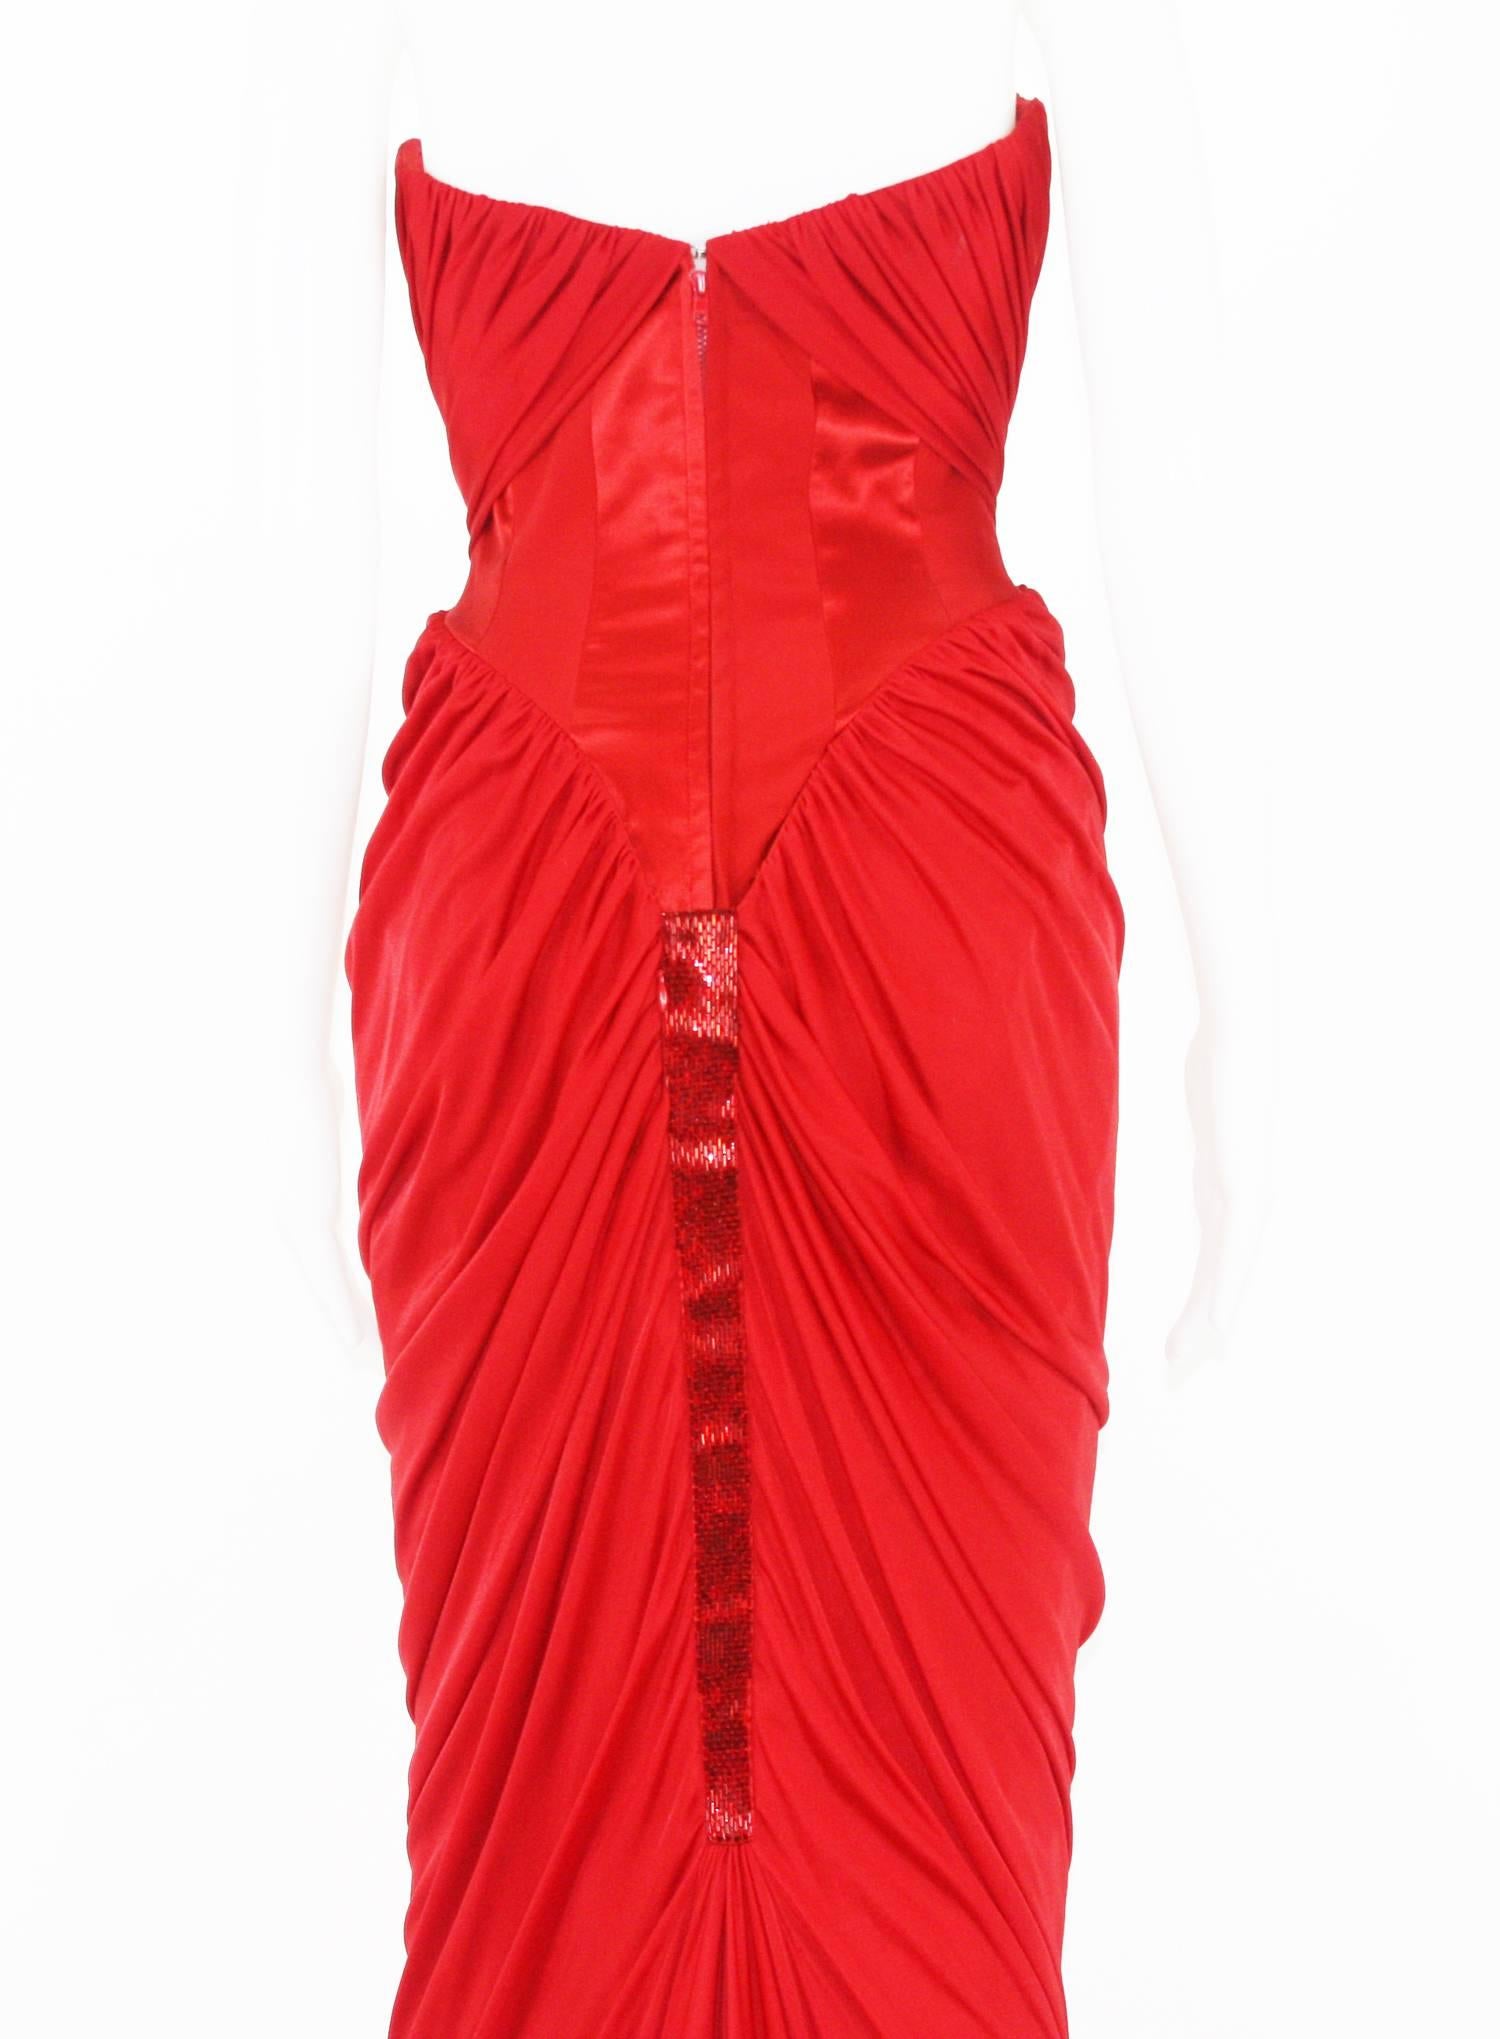 New Gianni Versace Couture 90's Lipstick Red Jersey Embellished Dress Gown 4 1